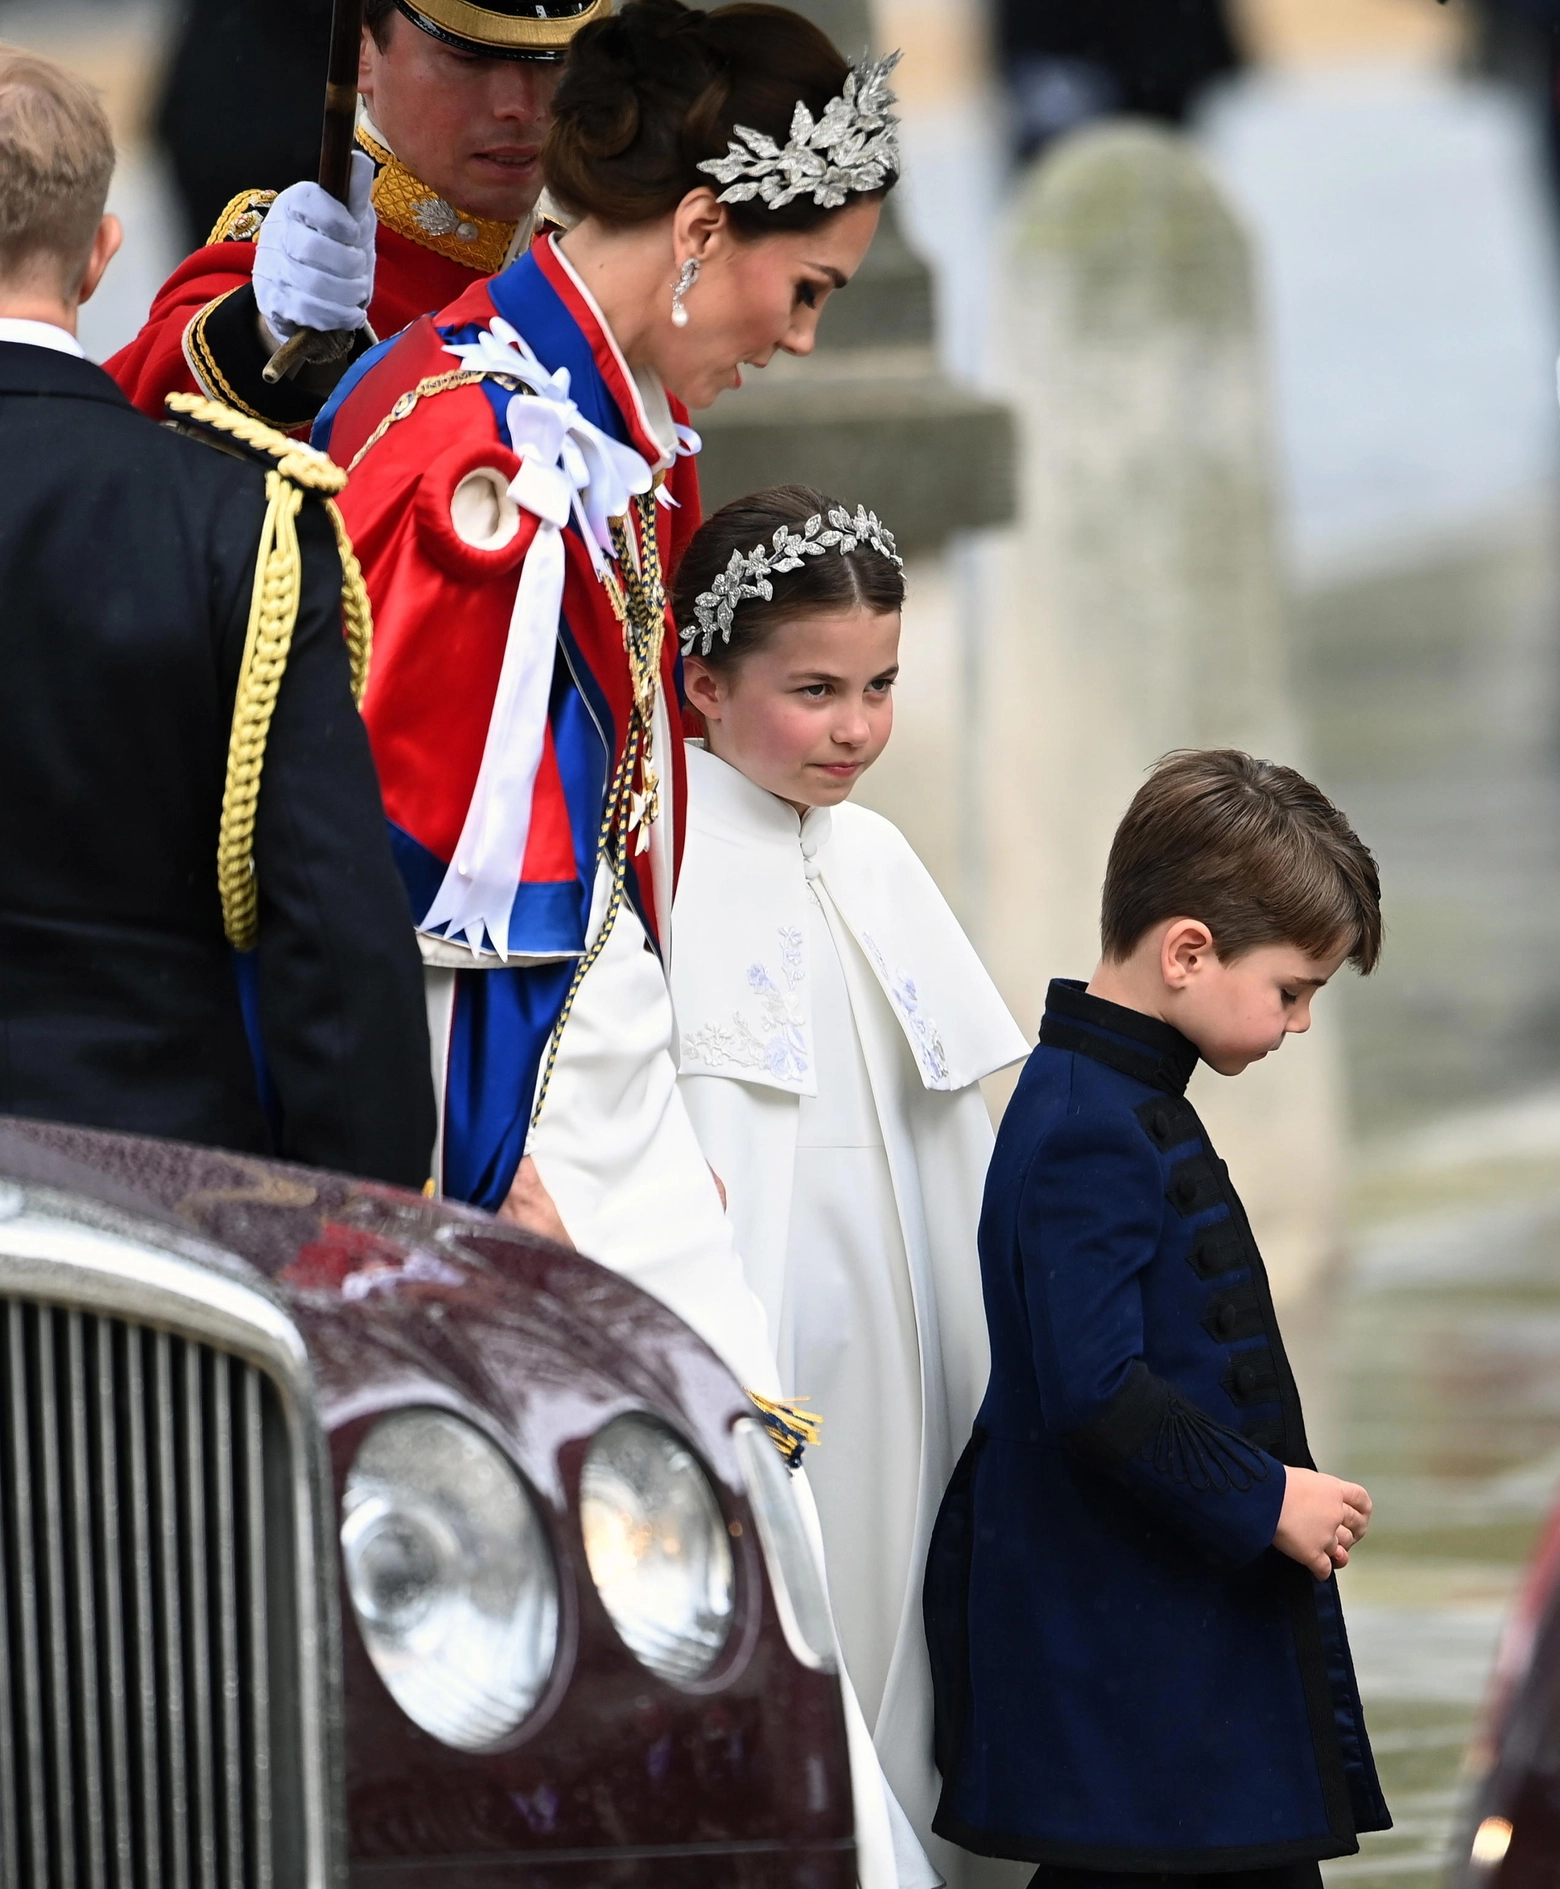 epa10611654 (L-R) Britain's Catherine, Princess of Wales, with her children Princess Charlotte and Prince Louis arrive for the Coronation of Britain's King Charles III and Queen Camilla at Westminster Abbey in London, Britain, 06 May 2023. Coronations of British Kings and Queens have taken place at Westminster Abbey for the last 900 years. The service will be attended by around 100 heads of state from around the world.  EPA/Andy Rain